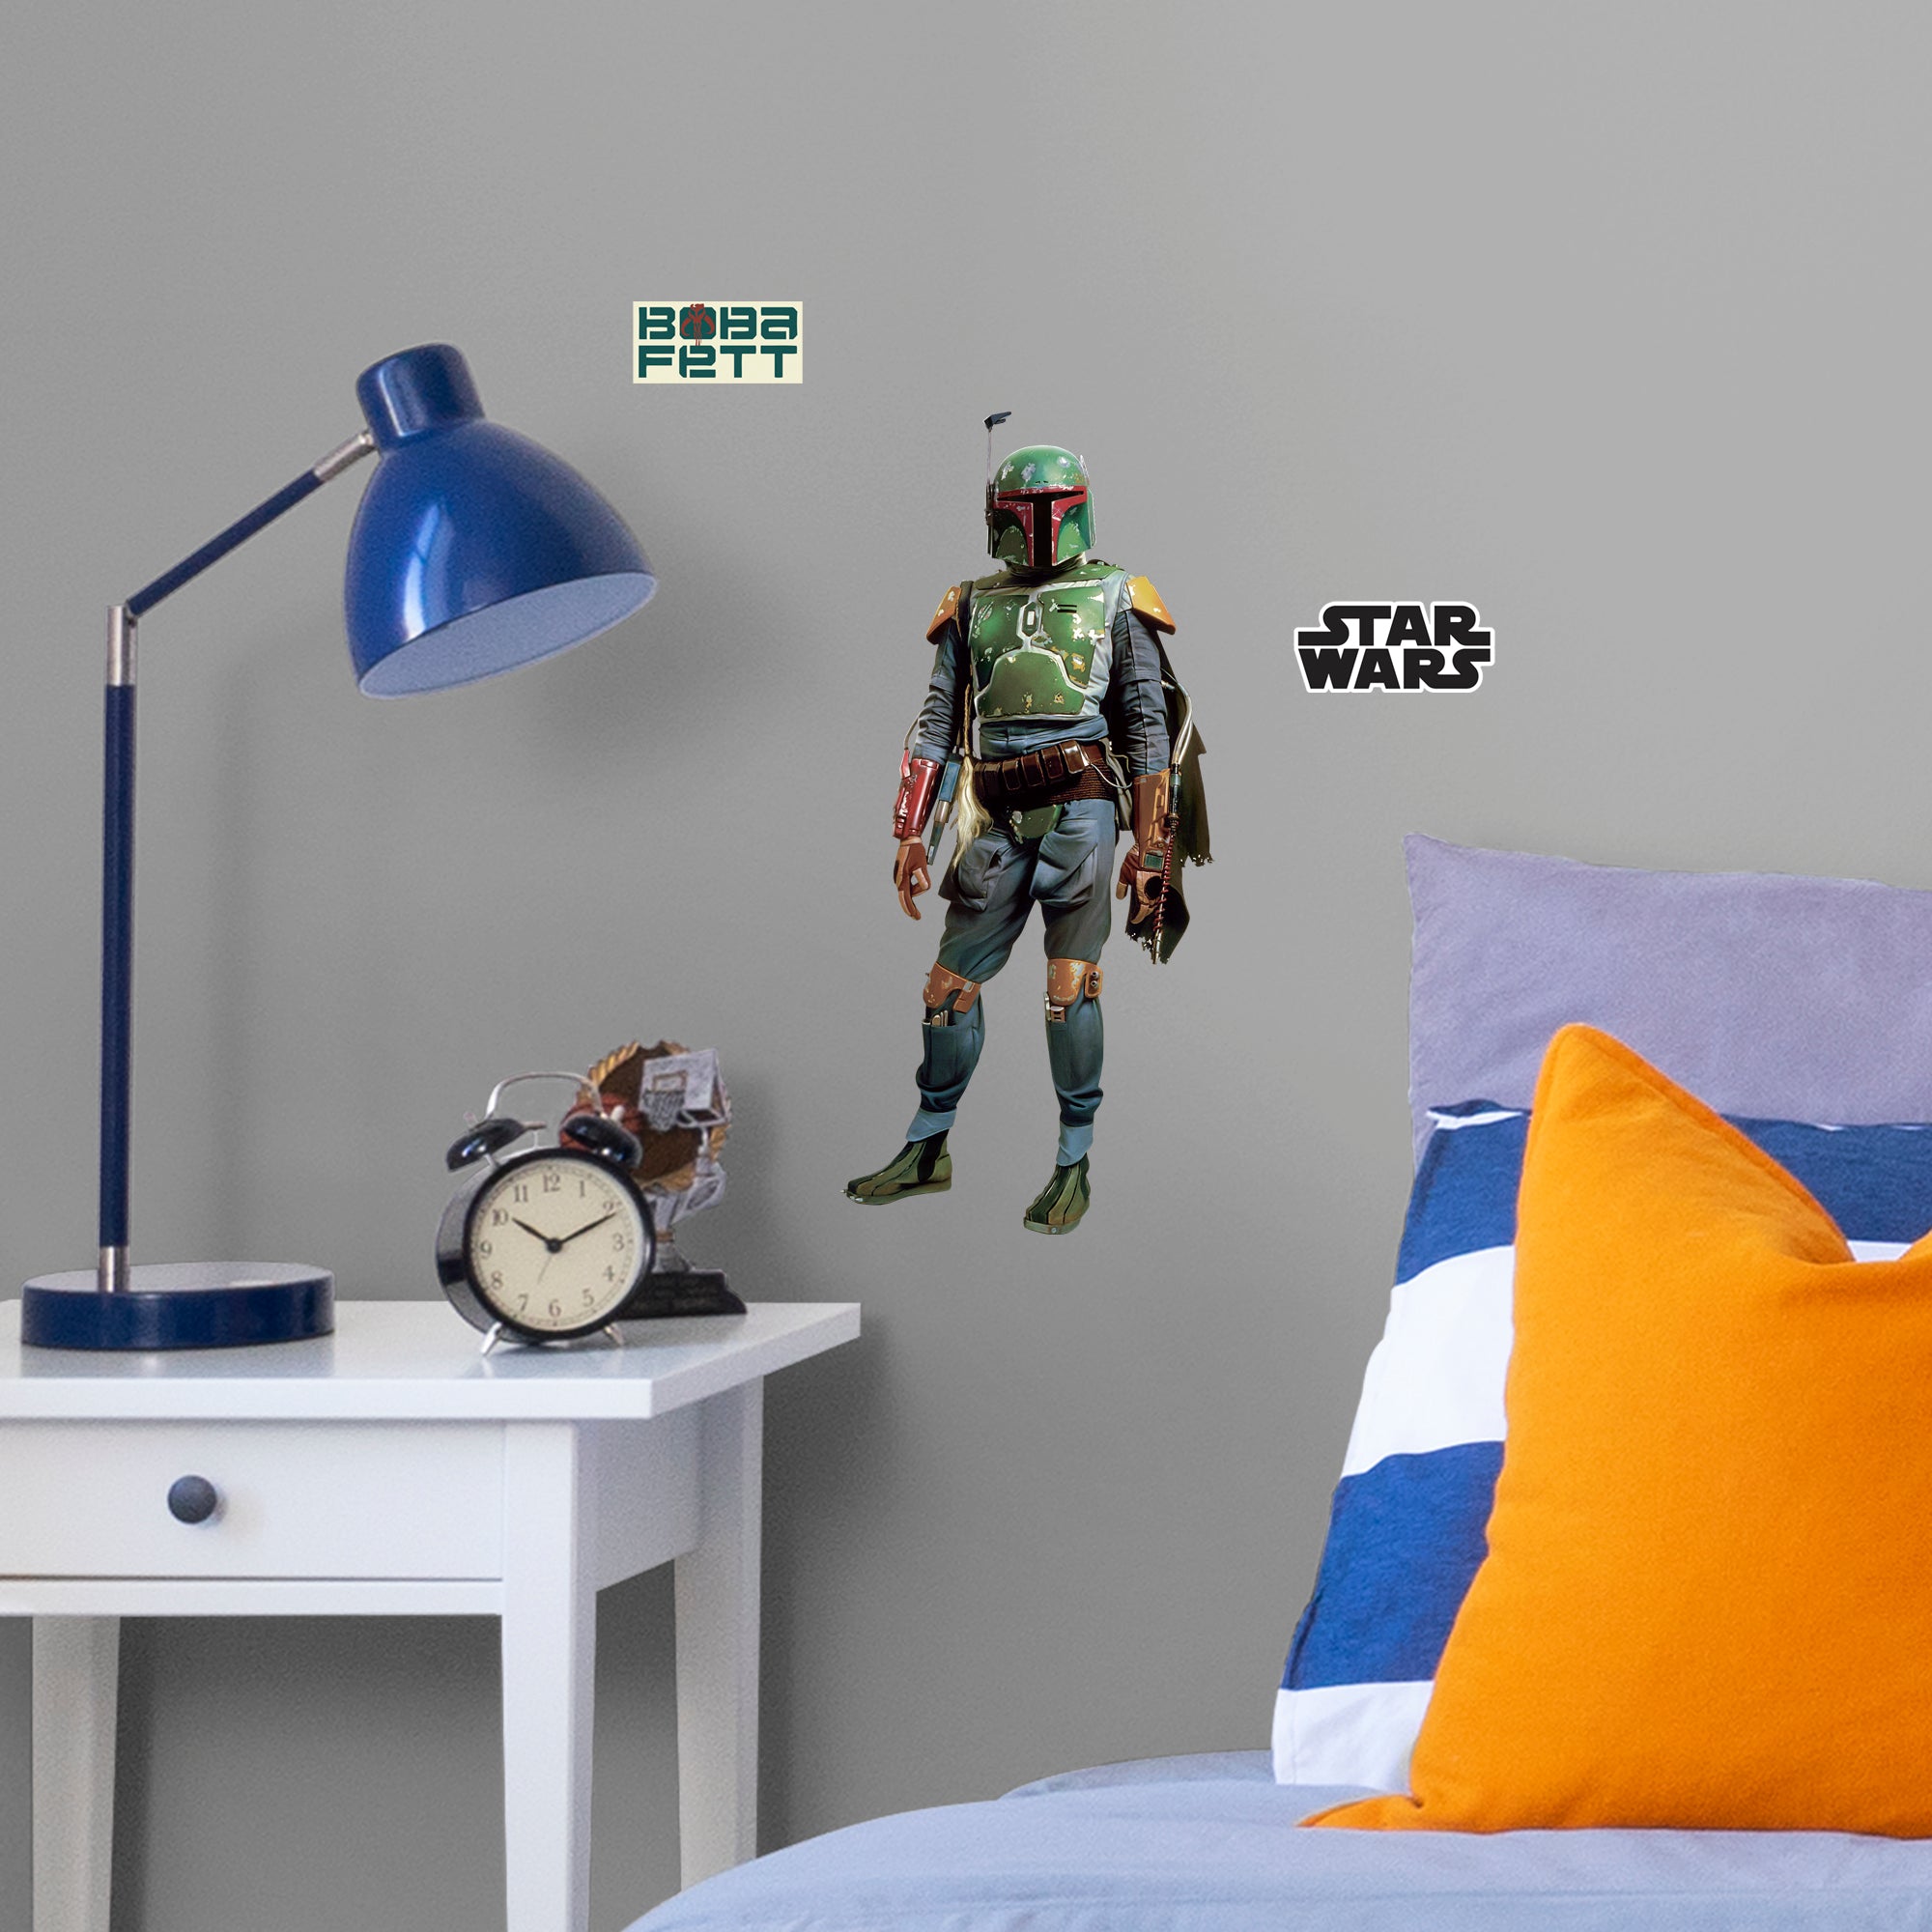 Boba Fett 2020 - Officially Licensed Star Wars Removable Wall Decal Large by Fathead | Vinyl